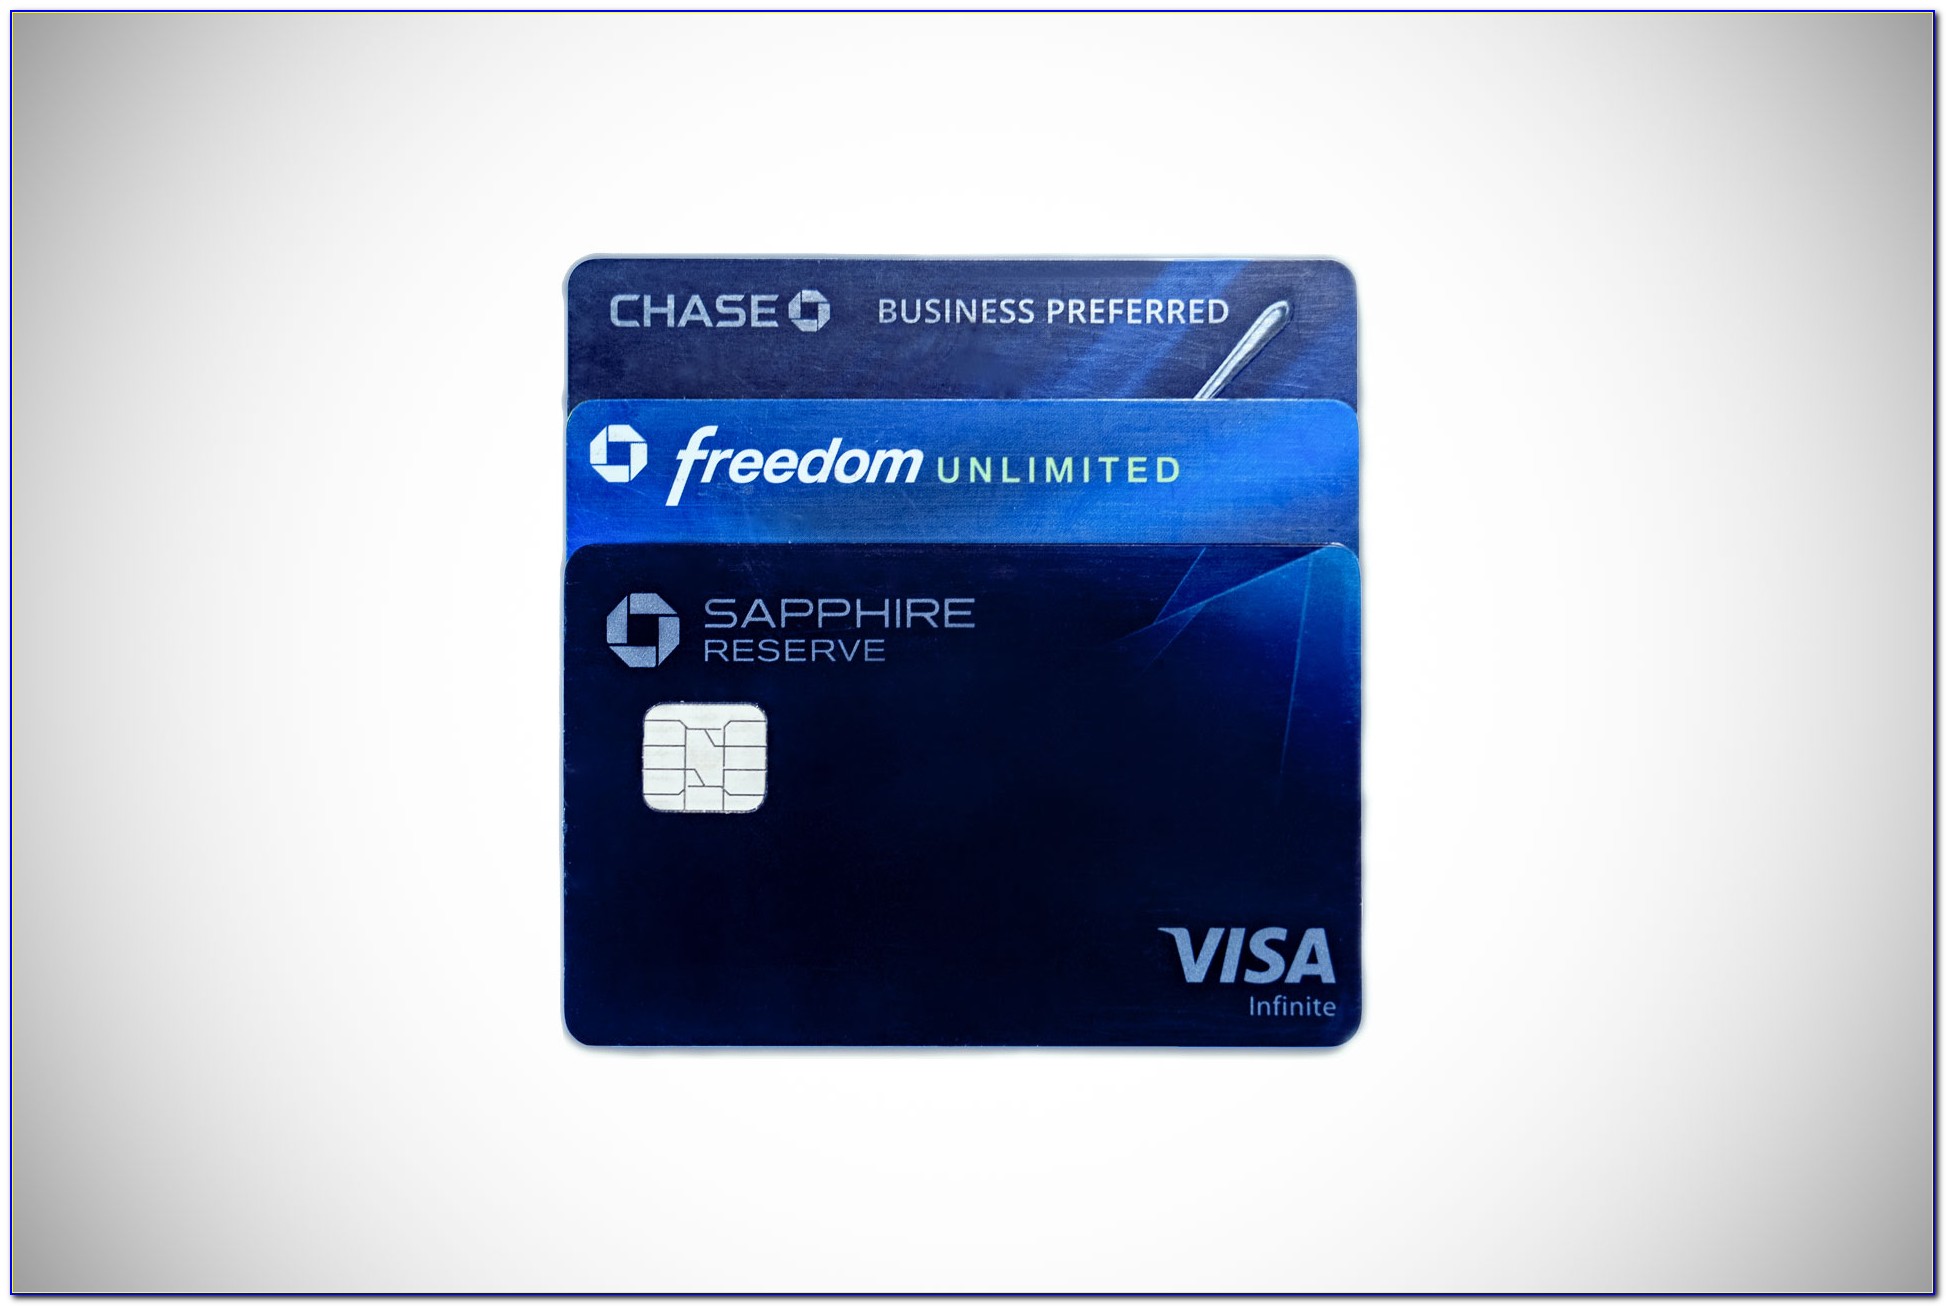 Chase Sapphire Reserve Business Credit Card